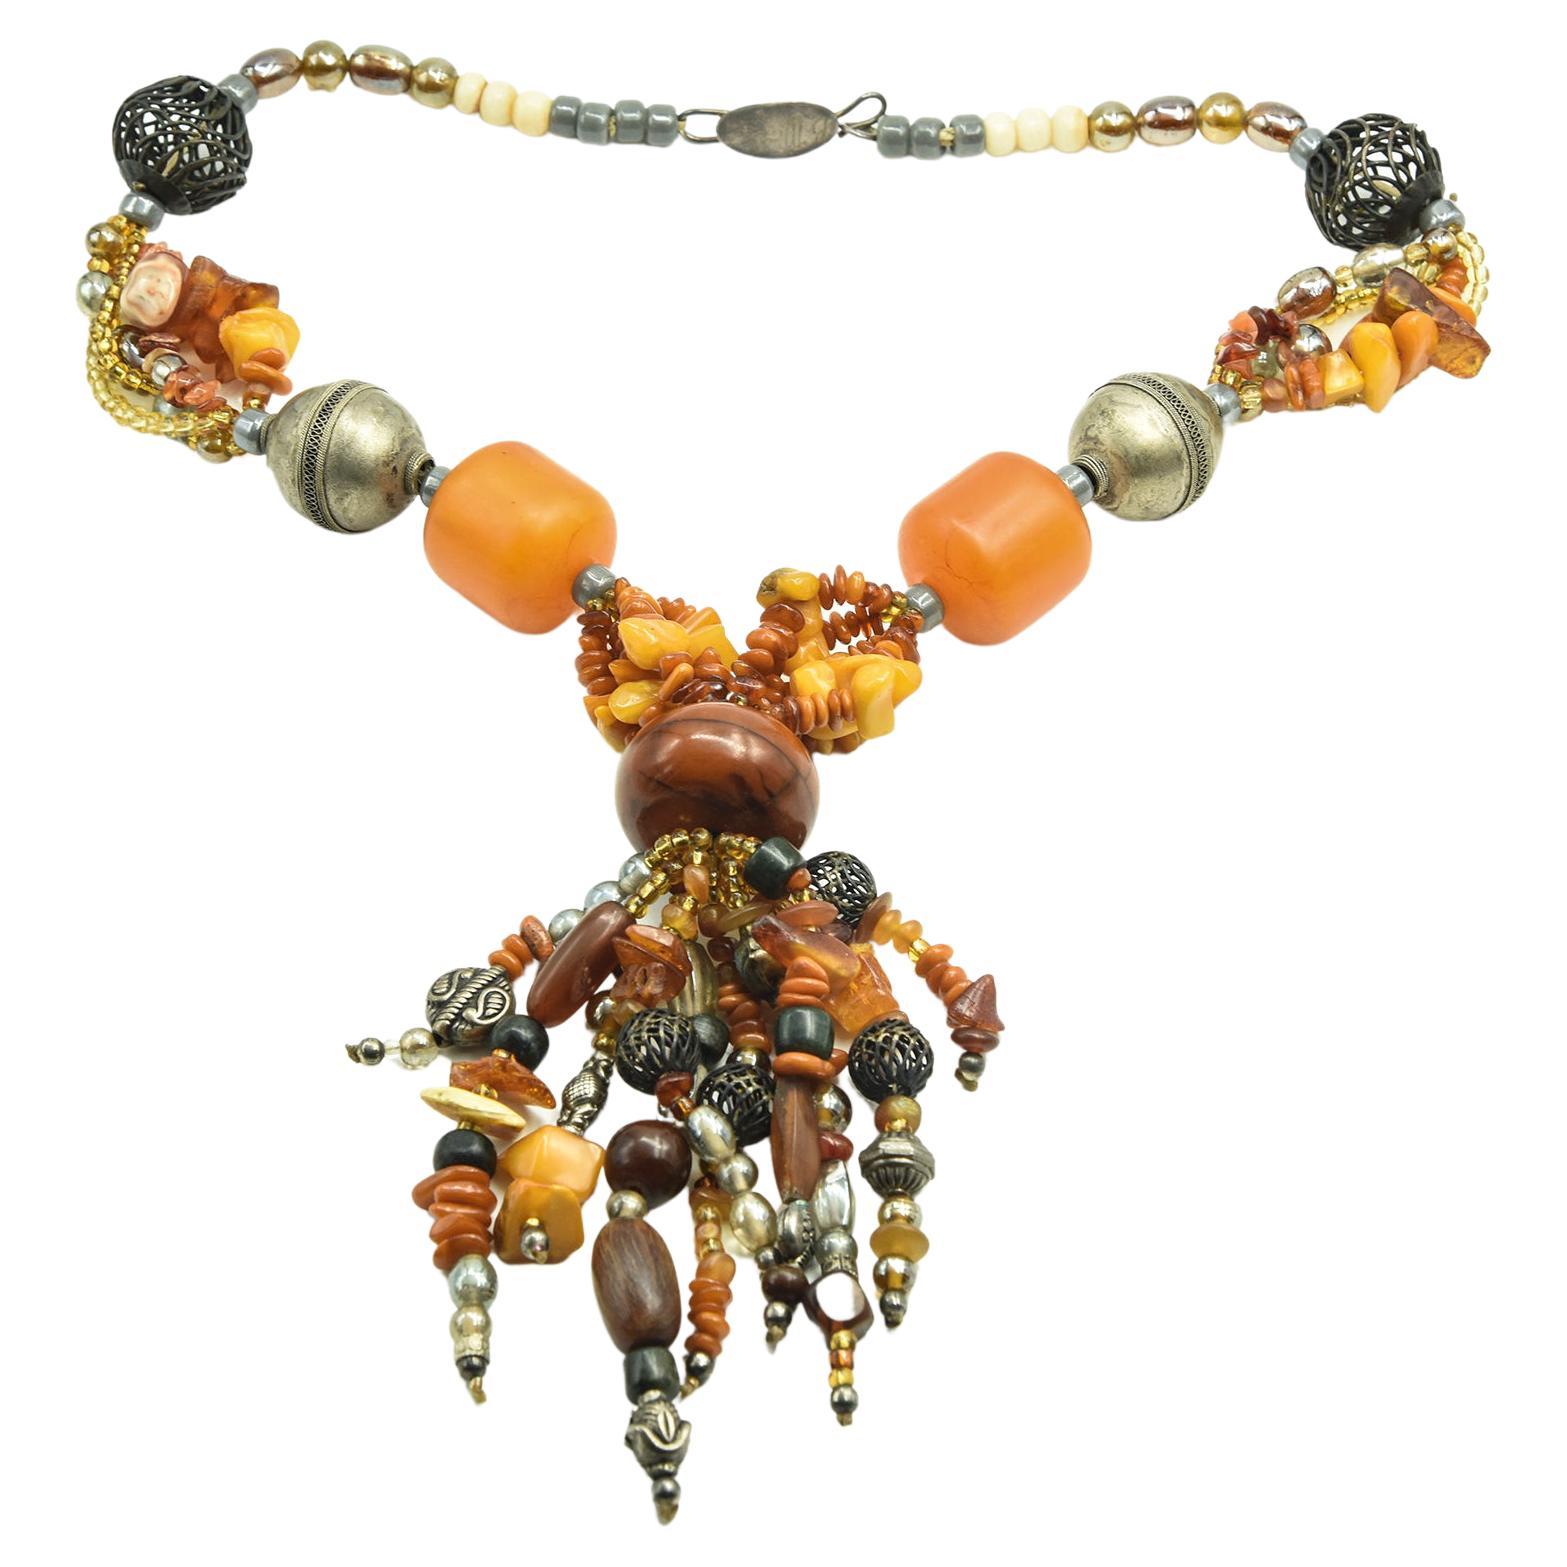 Unique handmade tassel necklace featuring amber, wood, bone, glass and metal beads.    

Marked on the clasp B. Marie                                                                                                                                    